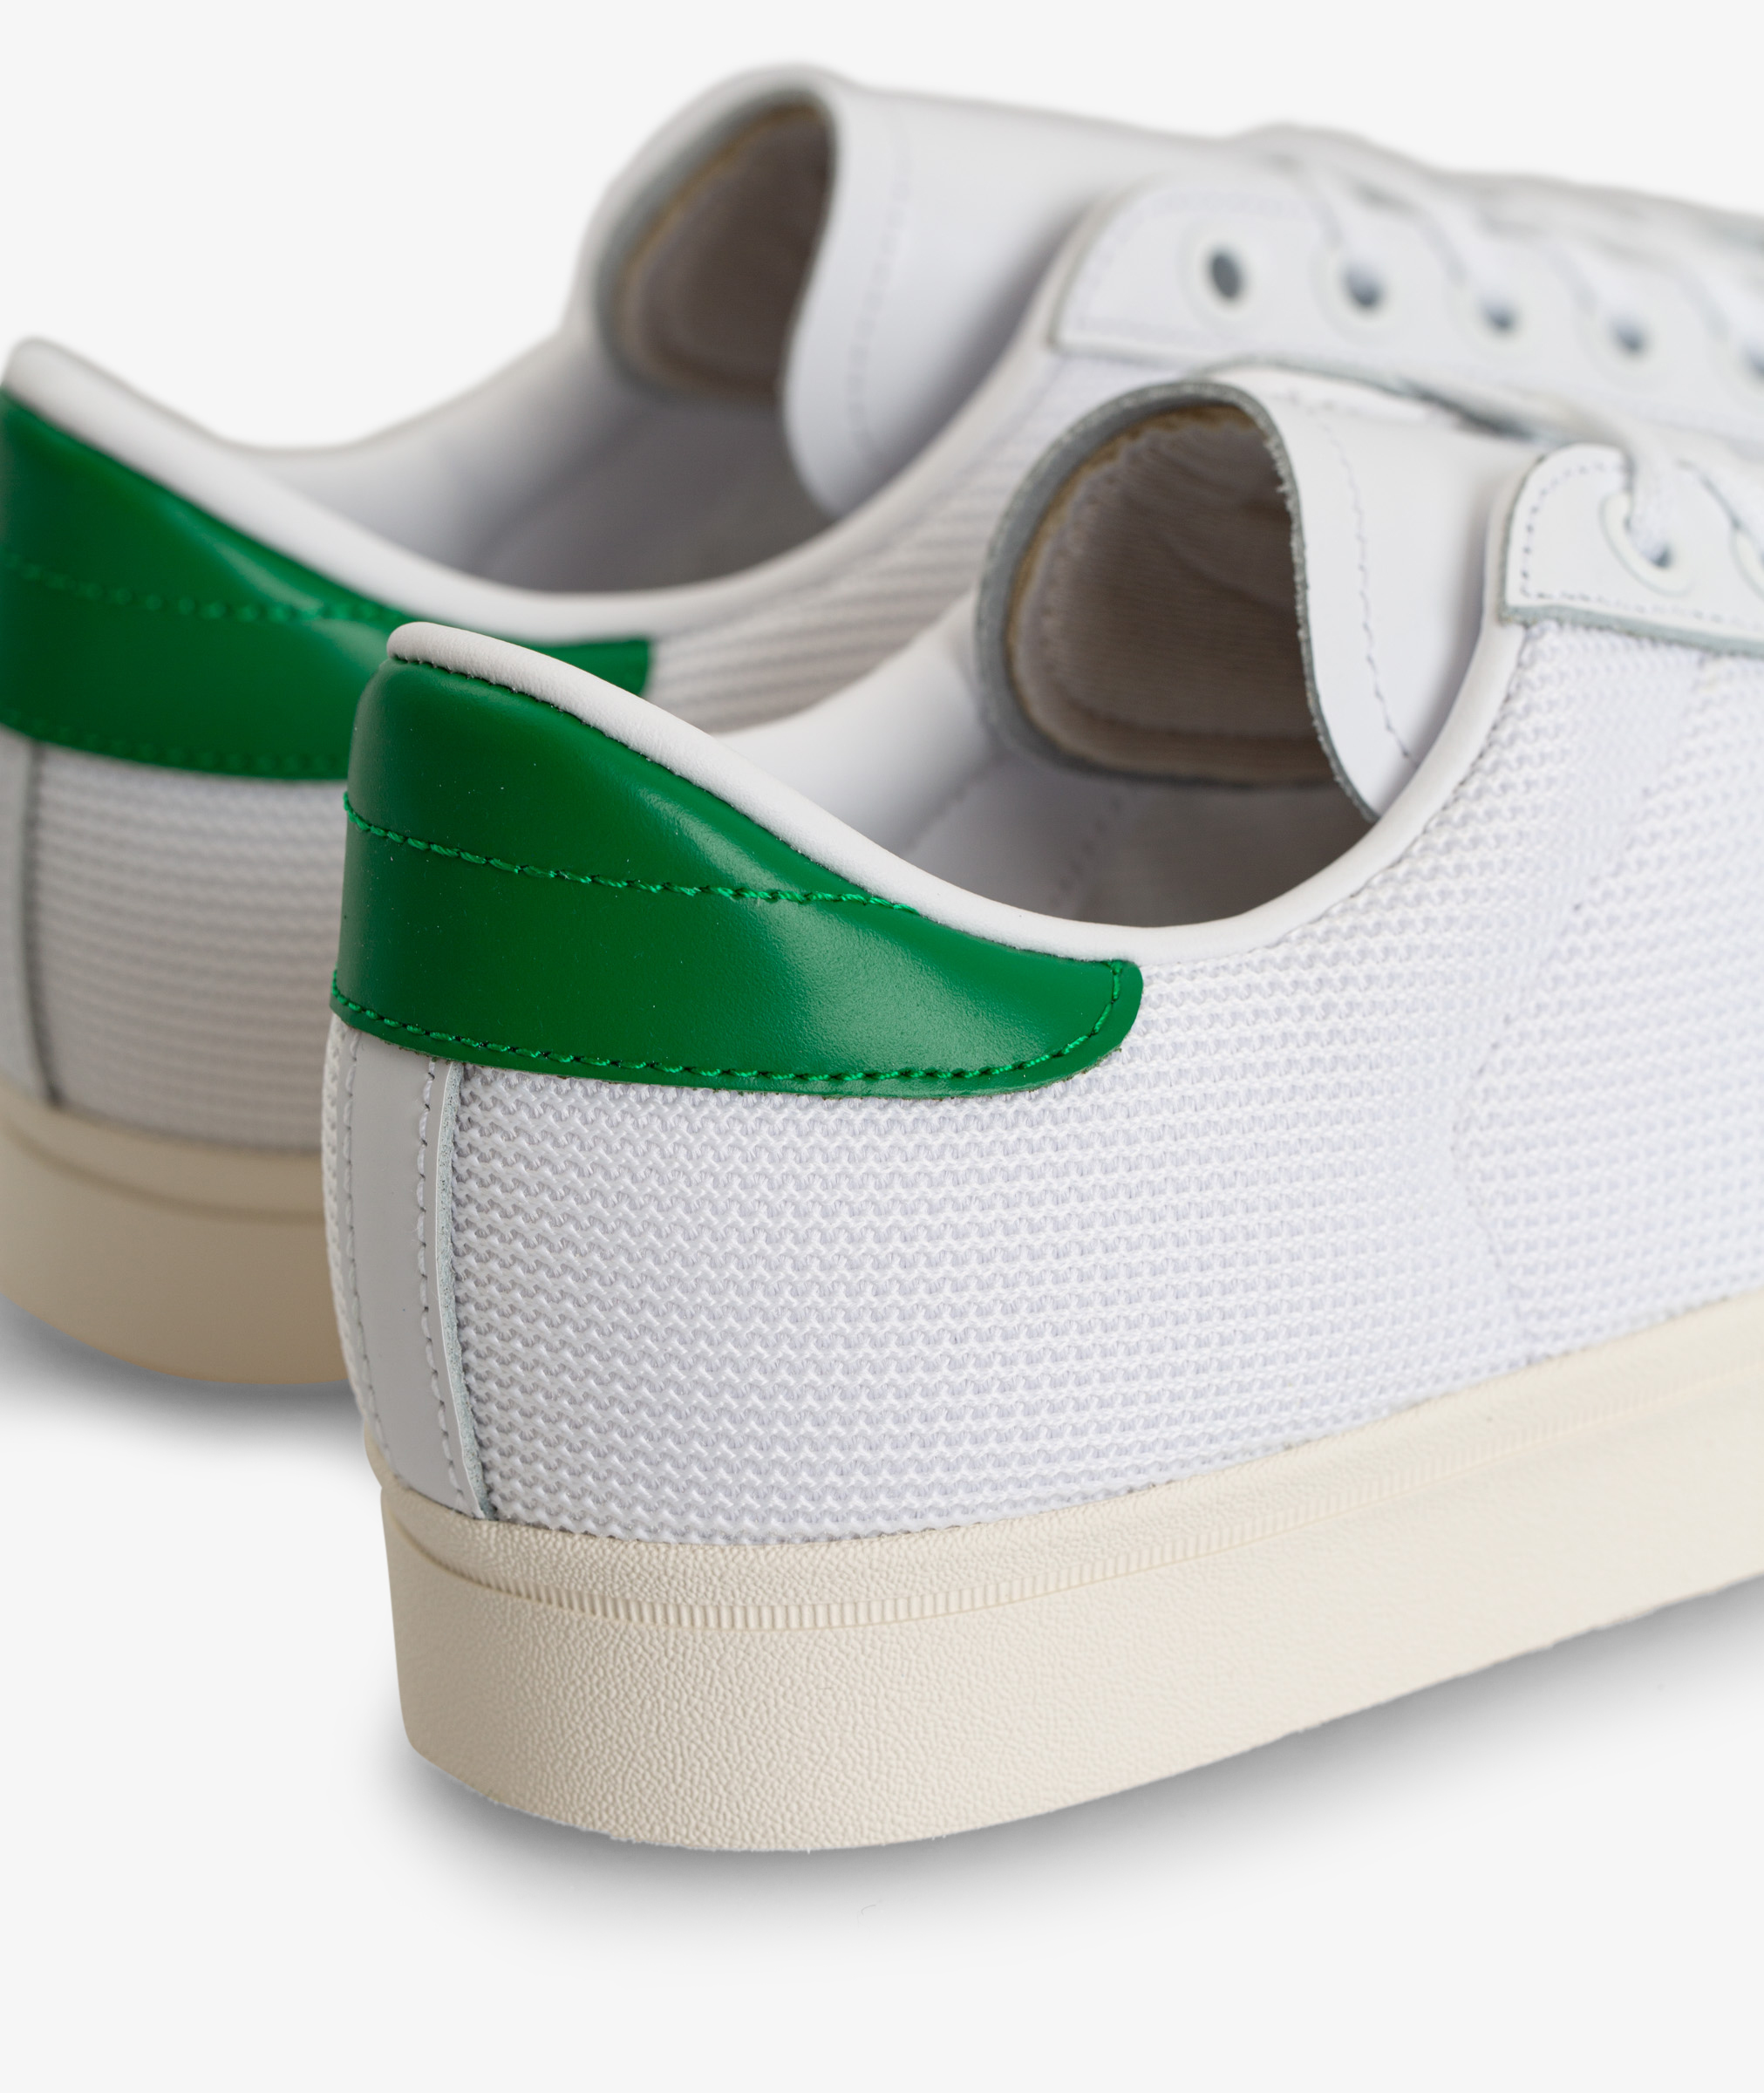 Norse Store Shipping Worldwide - Sneakers - Rod Laver Vintage